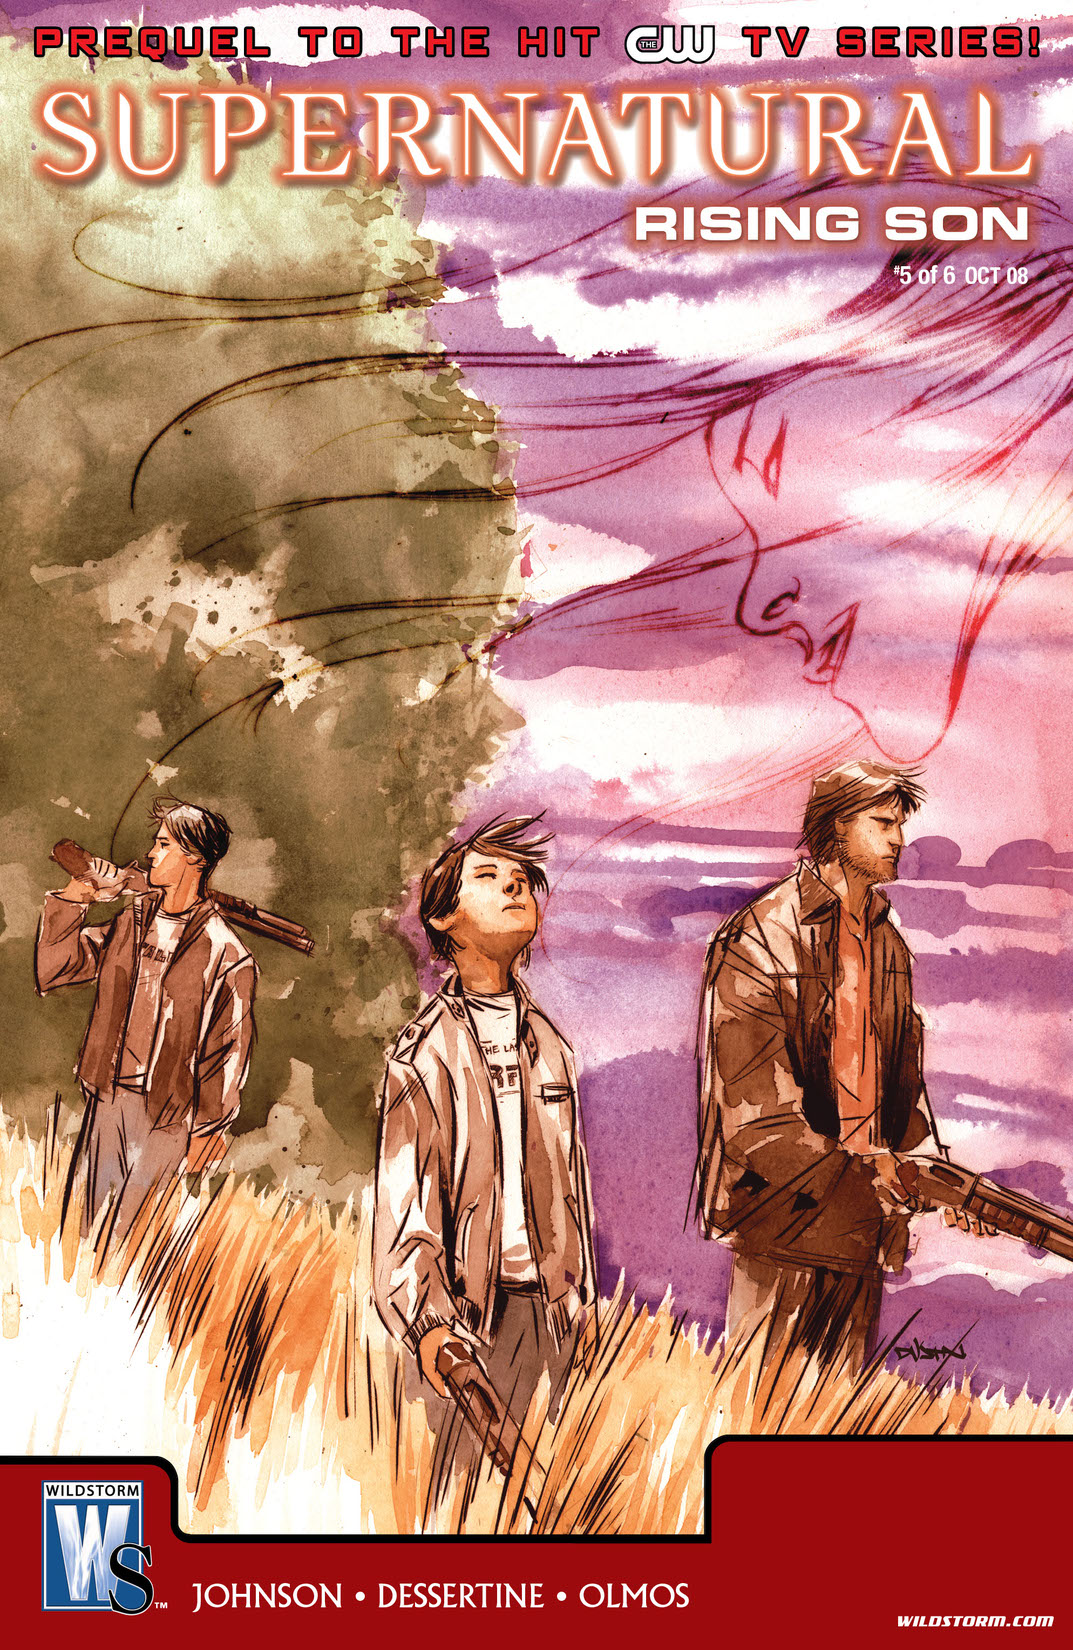 Supernatural: Rising Son #5 preview images